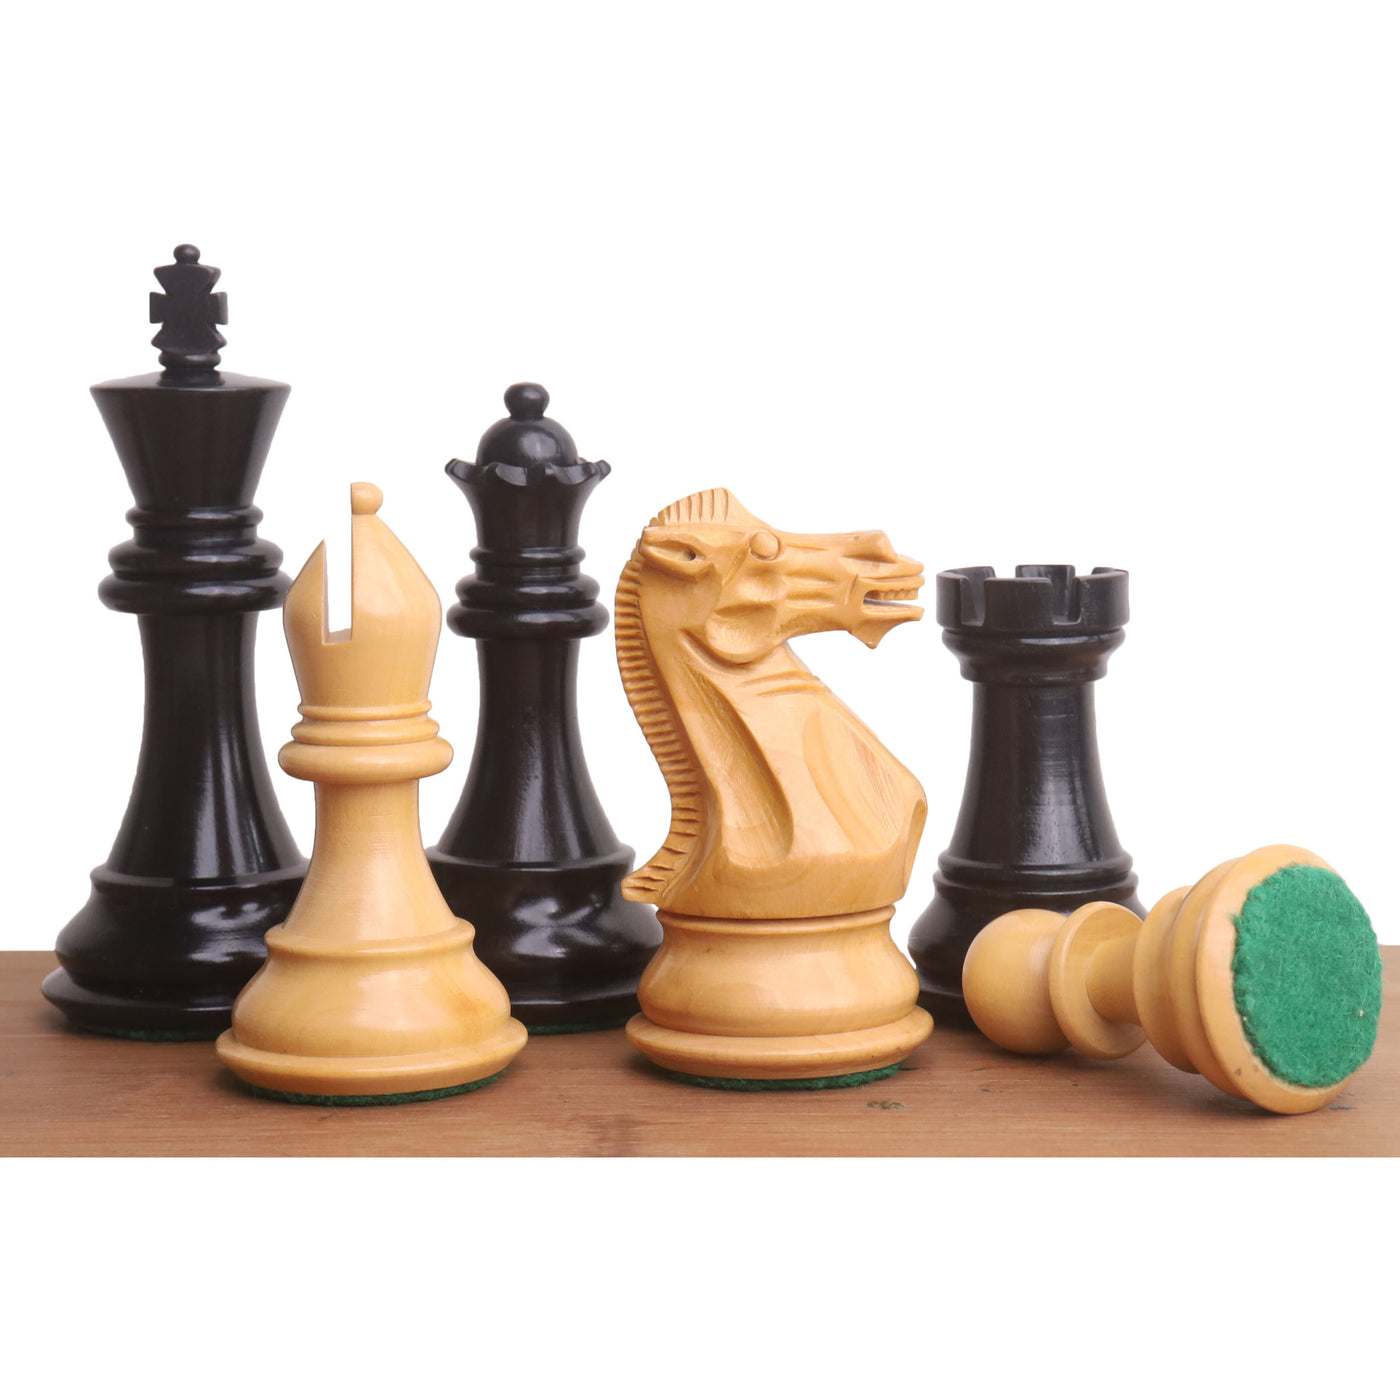 3.9" Professional Staunton Chess Set - Chess Pieces Only - Weighted Ebony wood